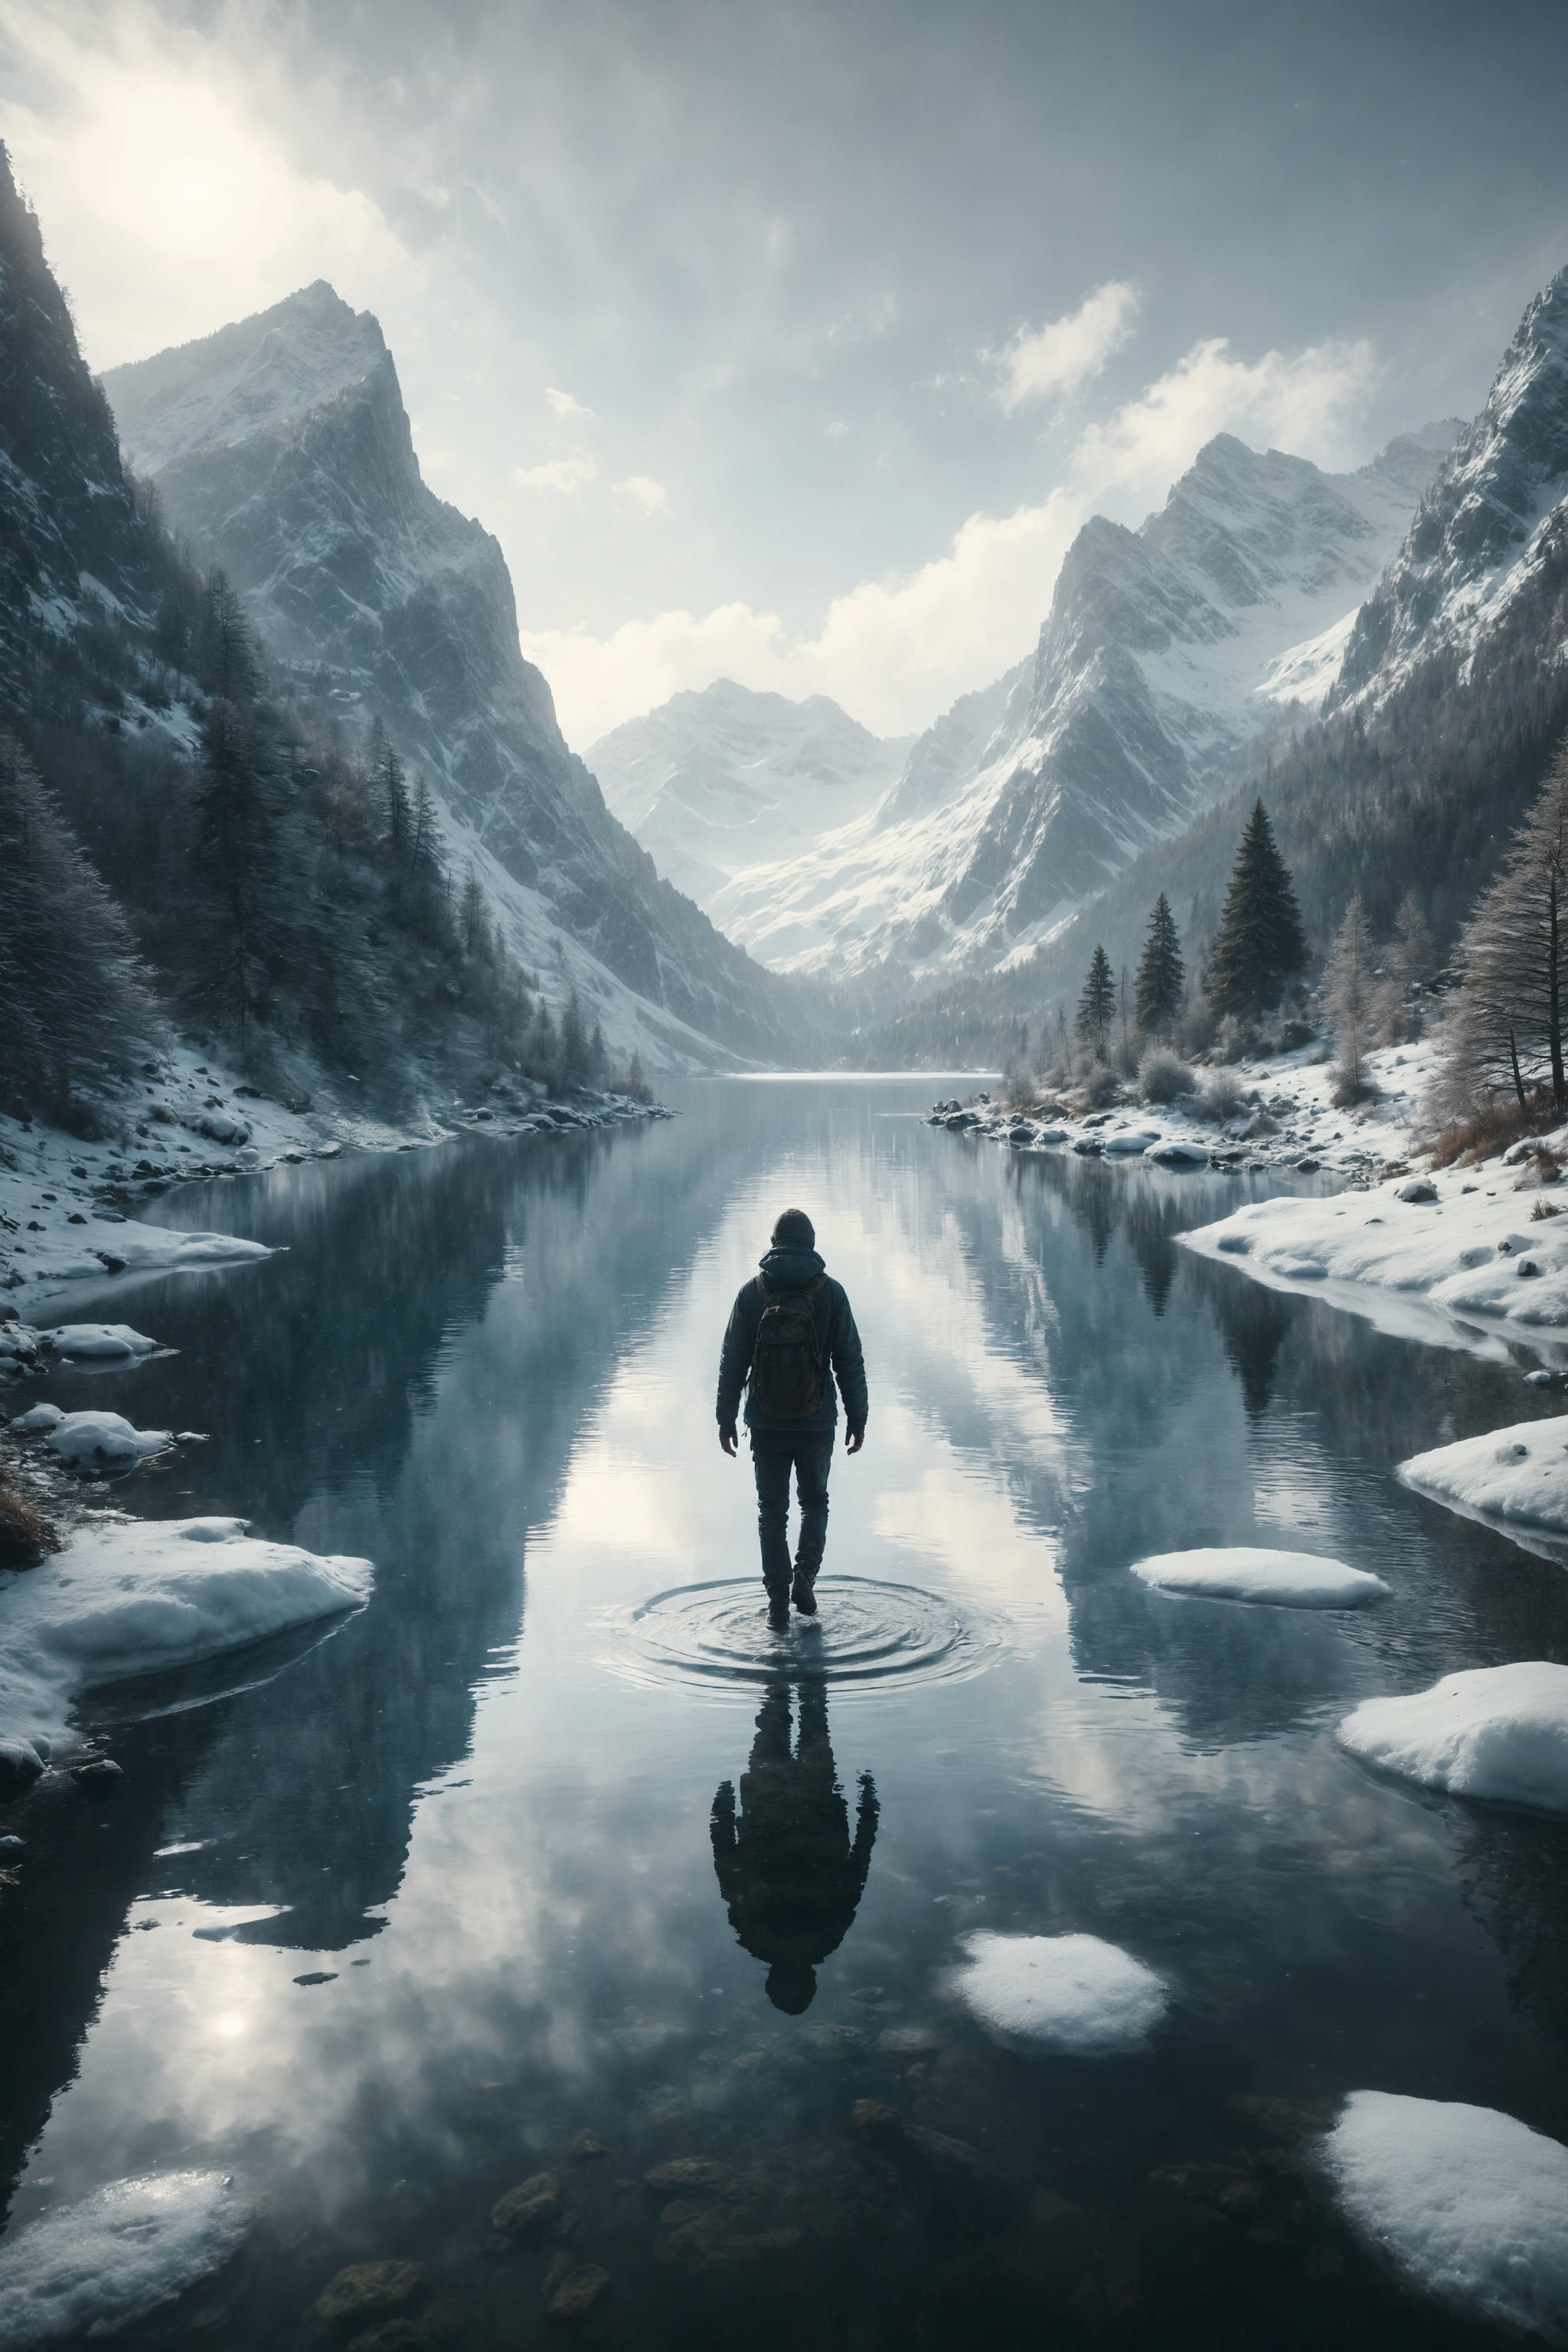 Generate an image of a person walking on water in a serene lake surrounded by snow-capped mountains.